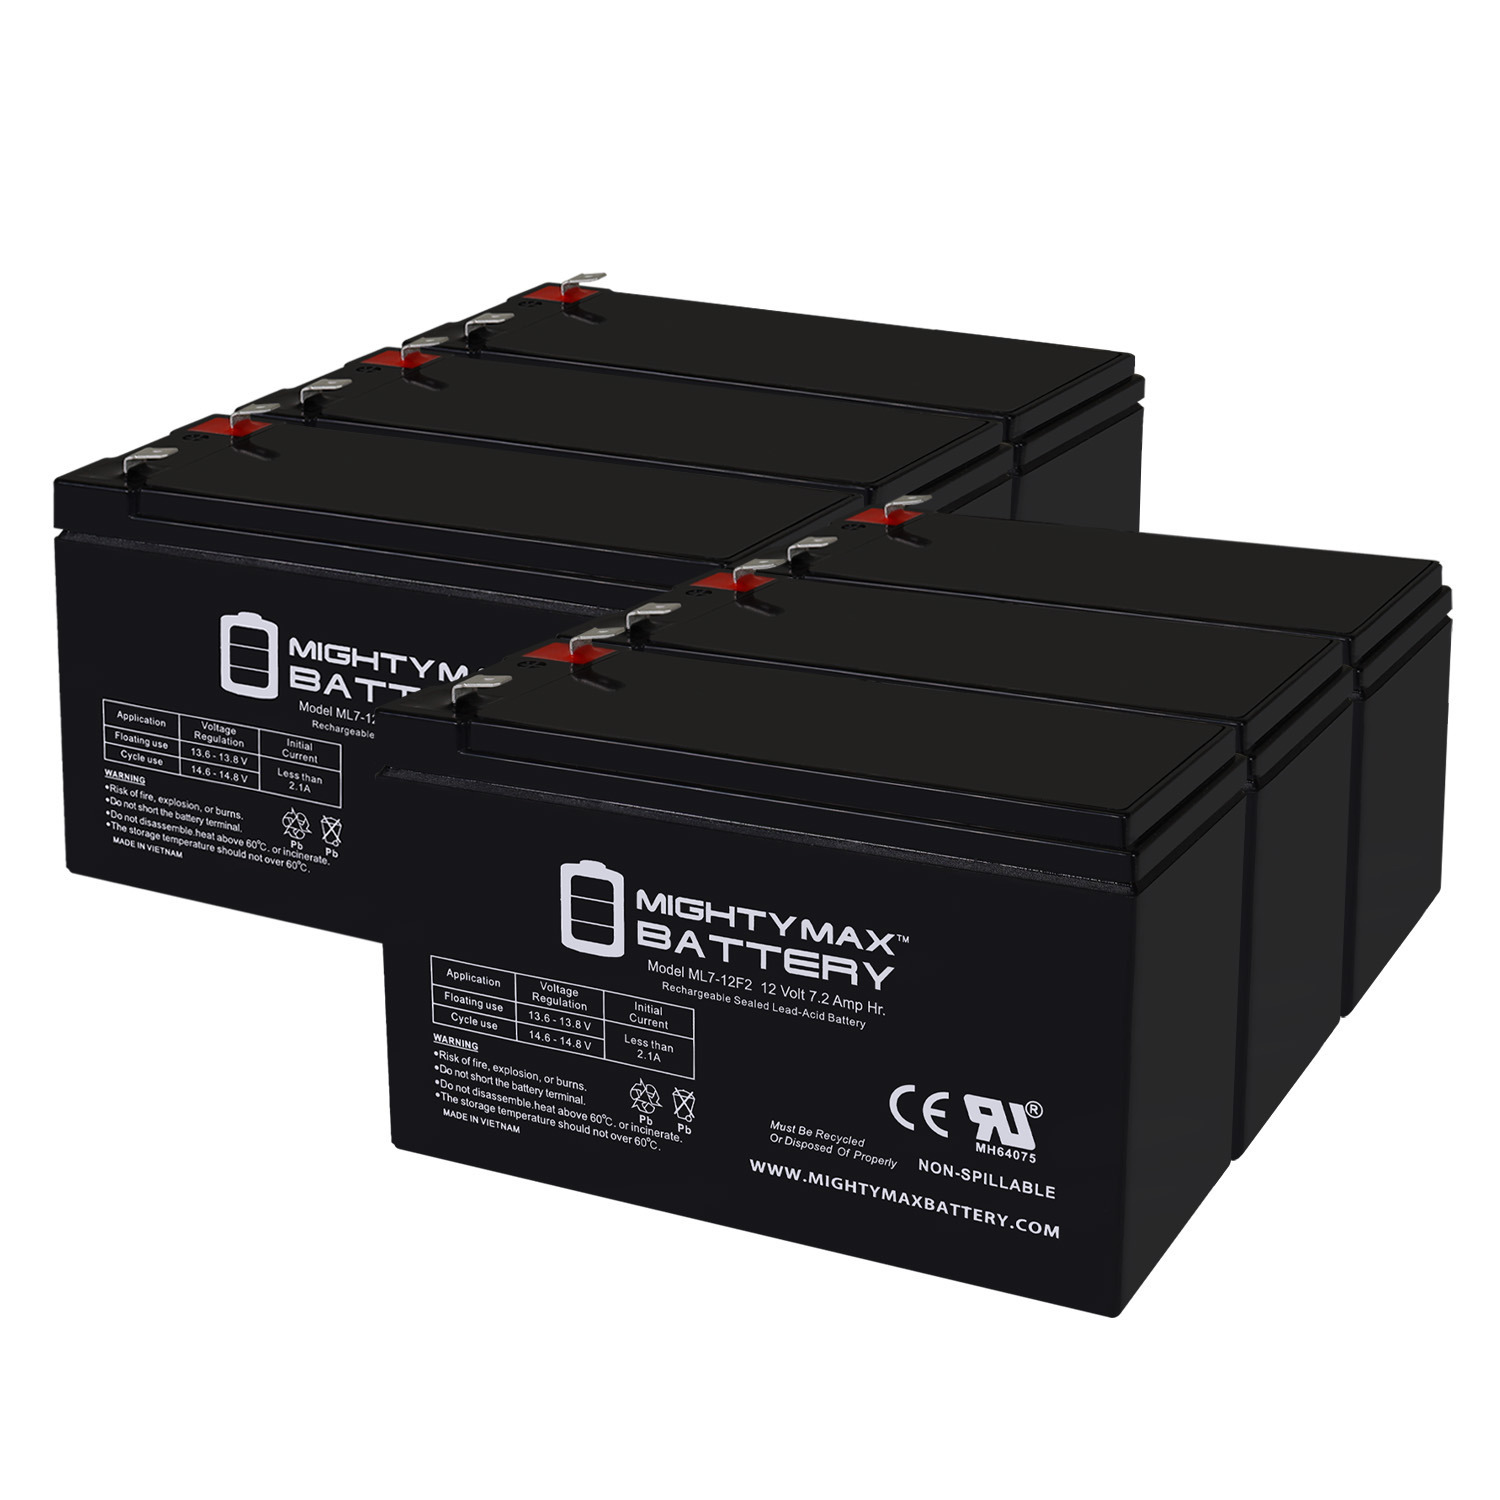 12V 7Ah F2 Replacement Battery for PowerWare PW9120-1000VA - 6 Pack